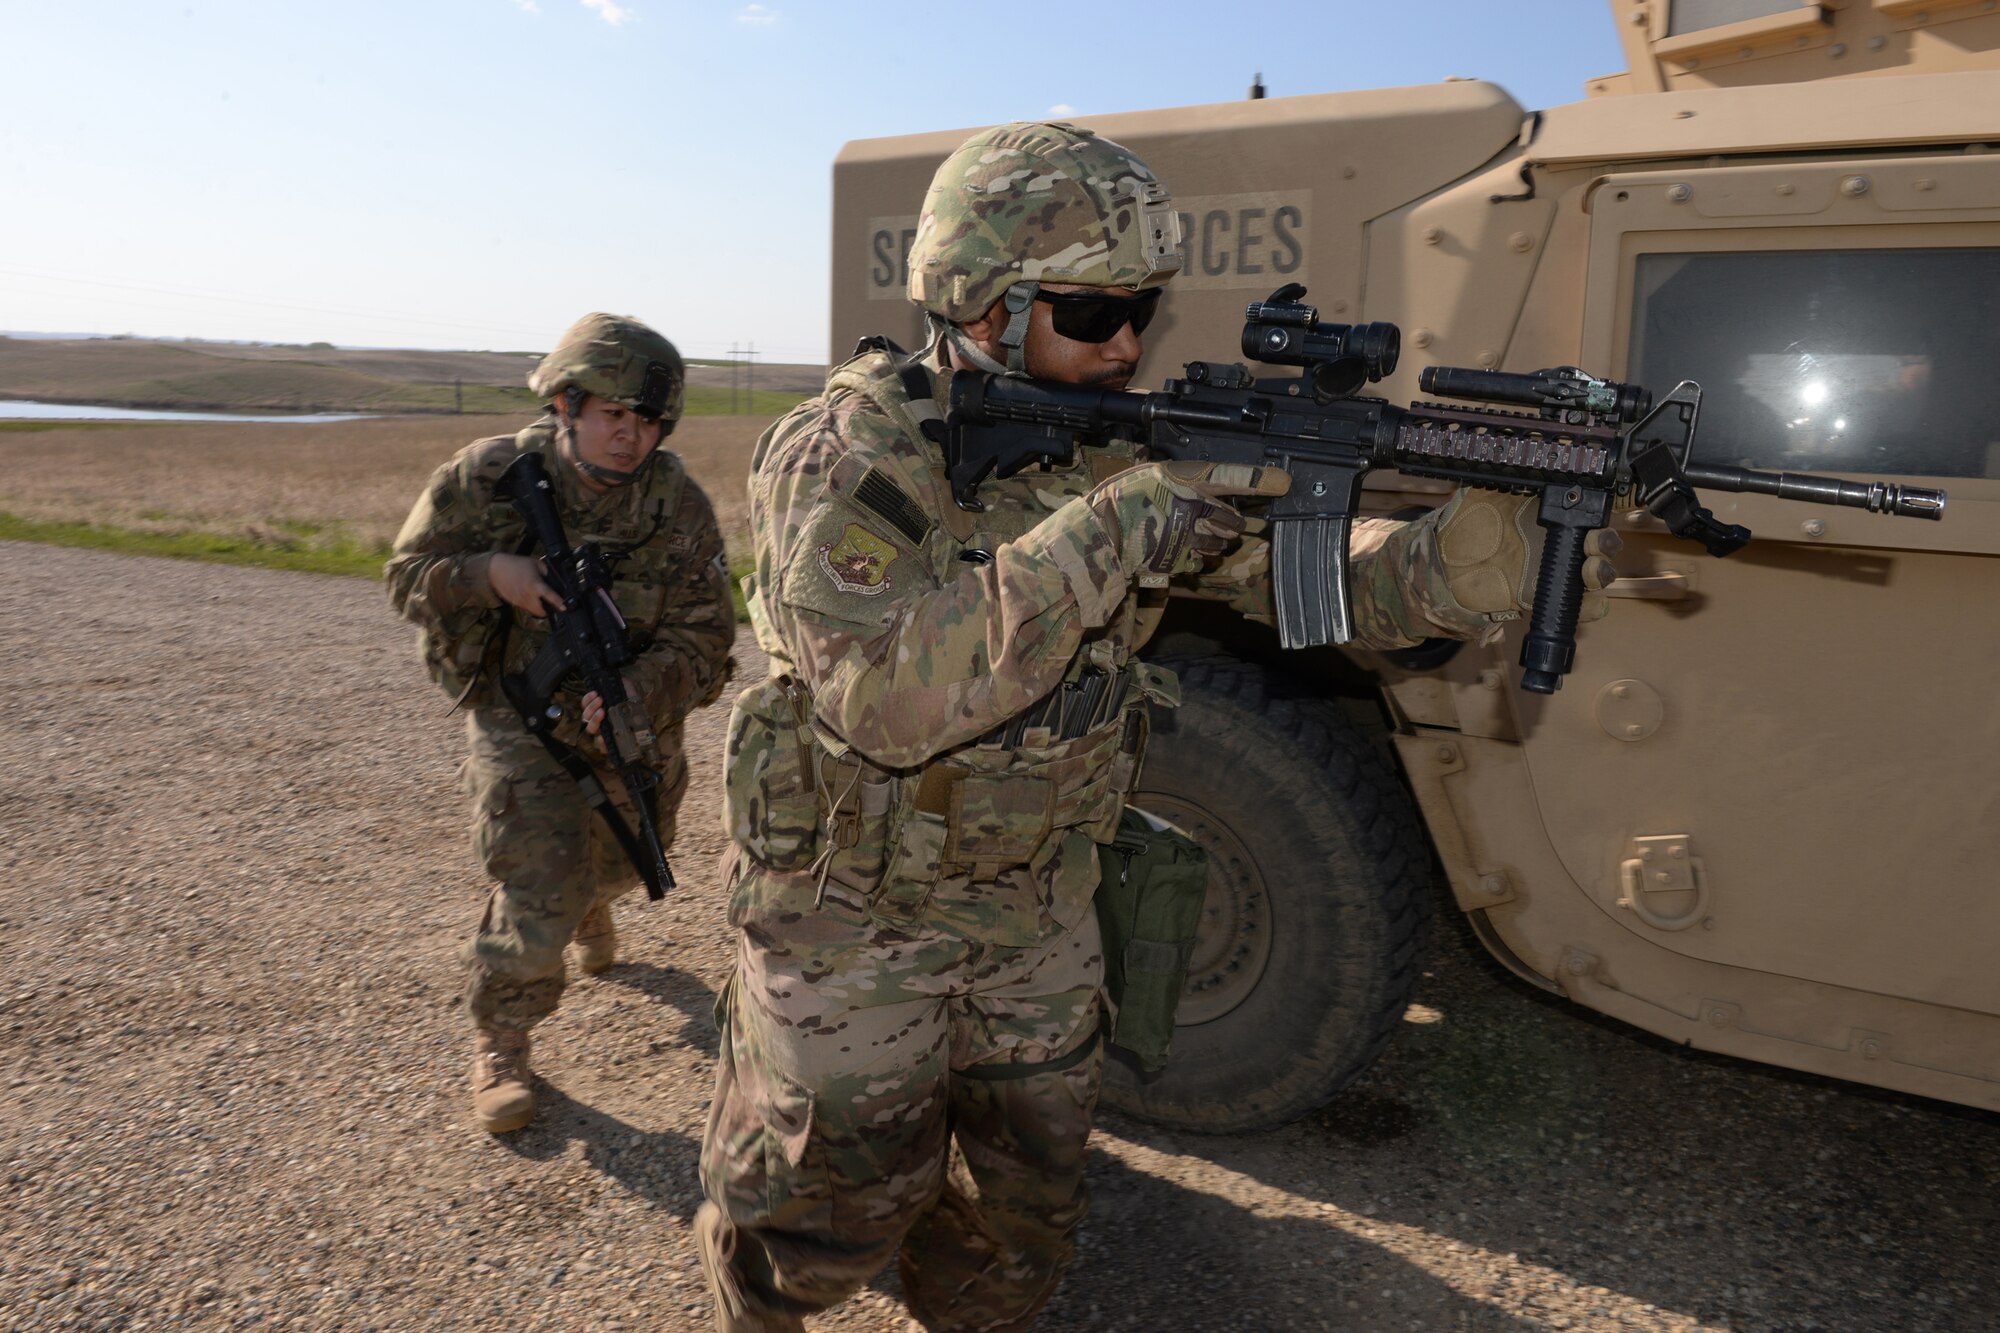 Senior Airman Rapheal Dexter, of the 91st Missile Security Forces Squadron, right, leads Staff Sgt. Shareen Mendiola, of the 219th Security Forces Squadron, as they advance on simulated intruders while utilizing a High Mobility Multipurpose Wheeled Vehicle (HMMWV), commonly known as a Humvee, for cover during a training exercise at a Minot Air Force Base, North Dakota, launch facility during a training exercise May 20, 2015. The exercise included an intermingled combination of North Dakota Air National Guard members doing their annual training and 91st Missile Security Forces Squadron members performing their day-to-day duties. The Air National Guard members are routinely integrated among the U.S. Air Force active duty personnel as they perform the real-World mission of missile field security in a seamless and indistinguishable manner. (U.S. Air National Guard photo by Senior Master Sgt. David H. Lipp/Released)